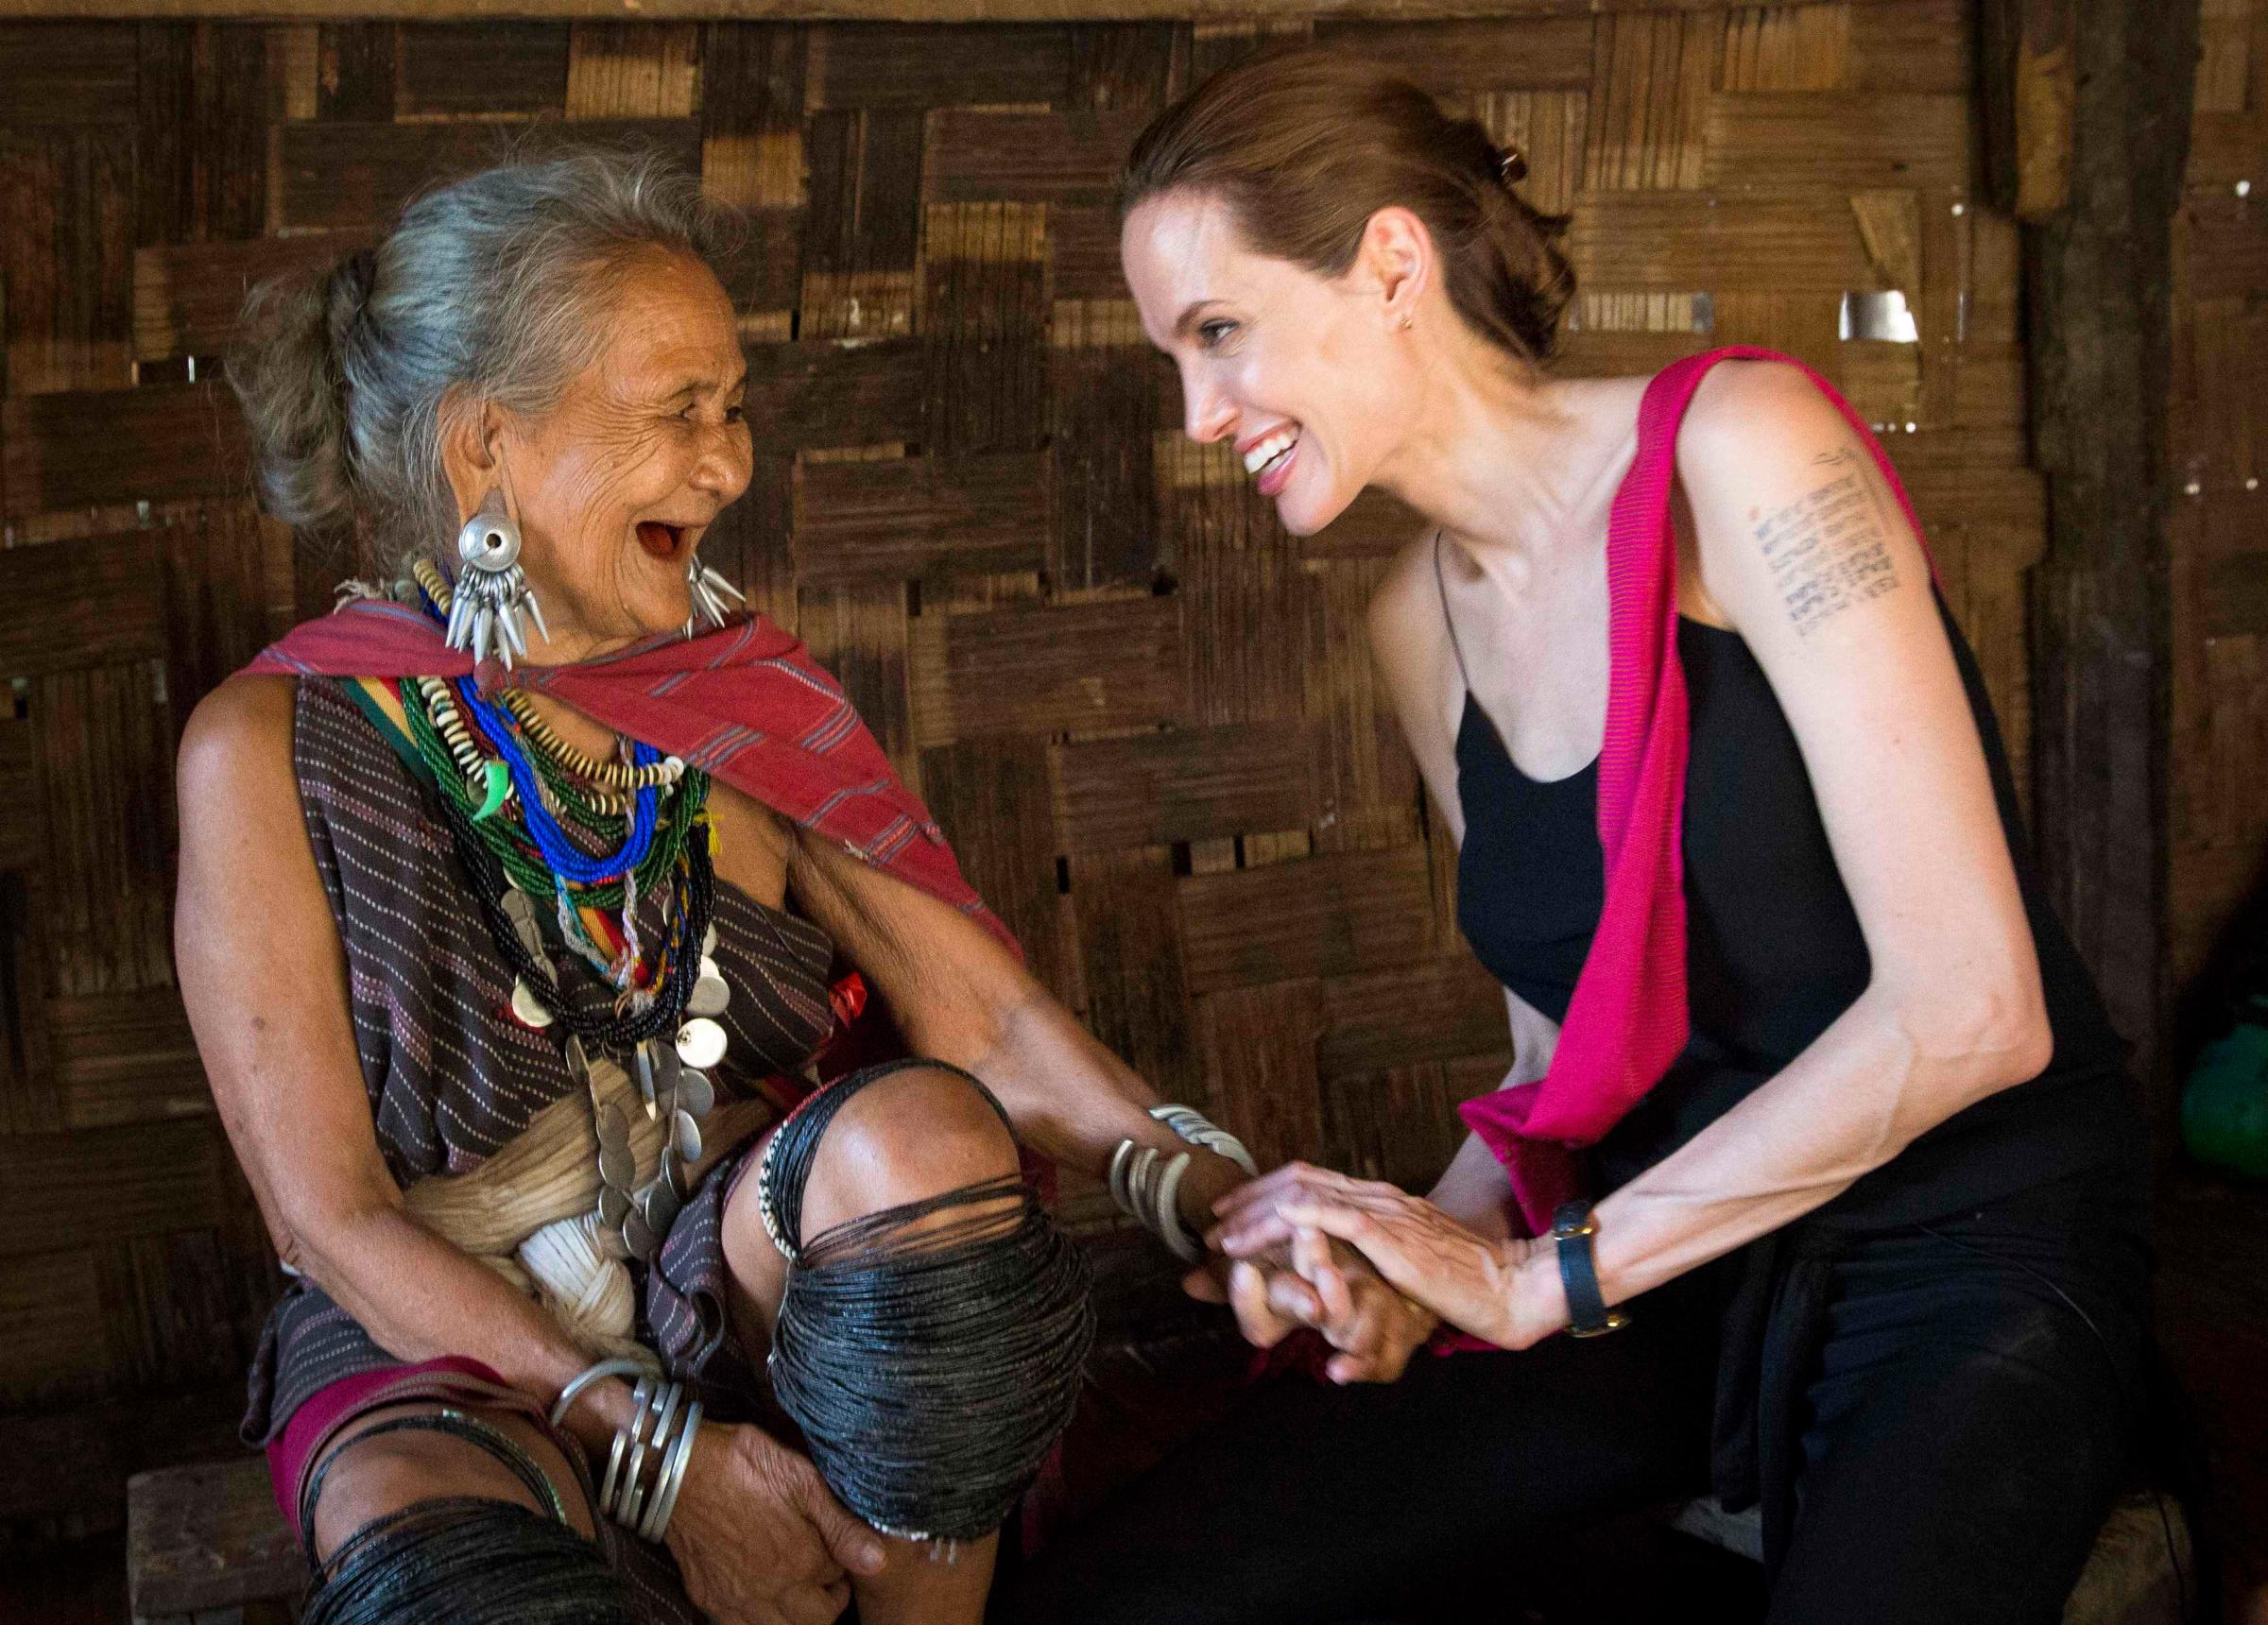 Handout photo shows Angelina Jolie, UNHCR special envoy, visiting ethnic Karenni refugee Baw Meh from Myanmar on World Refugee Day, at Ban Mai Nai Soi refugee camp in the province of Mae Hong Son